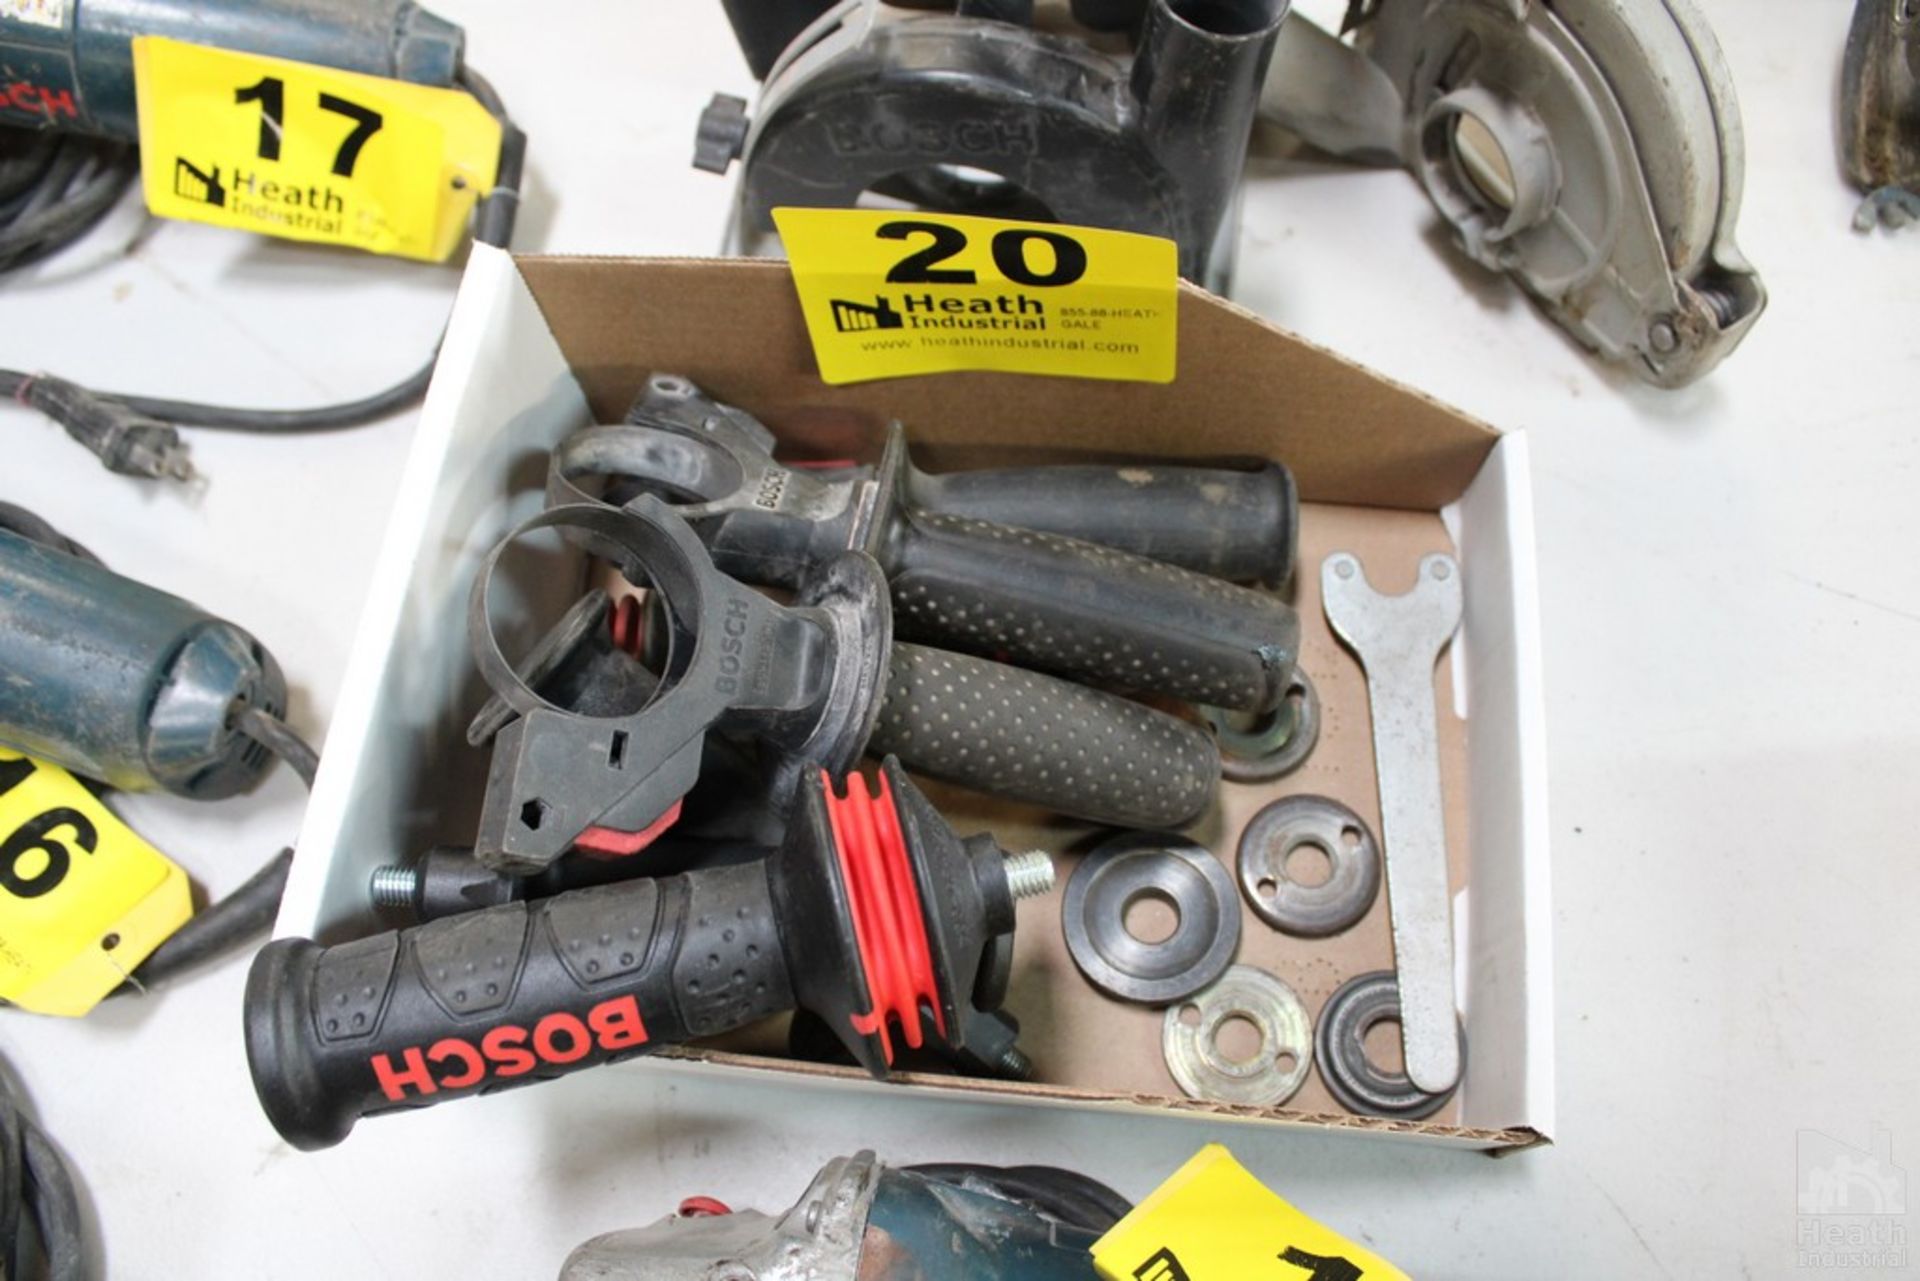 BOSCH HANDLES, WRENCH AND BLADE LOCKS